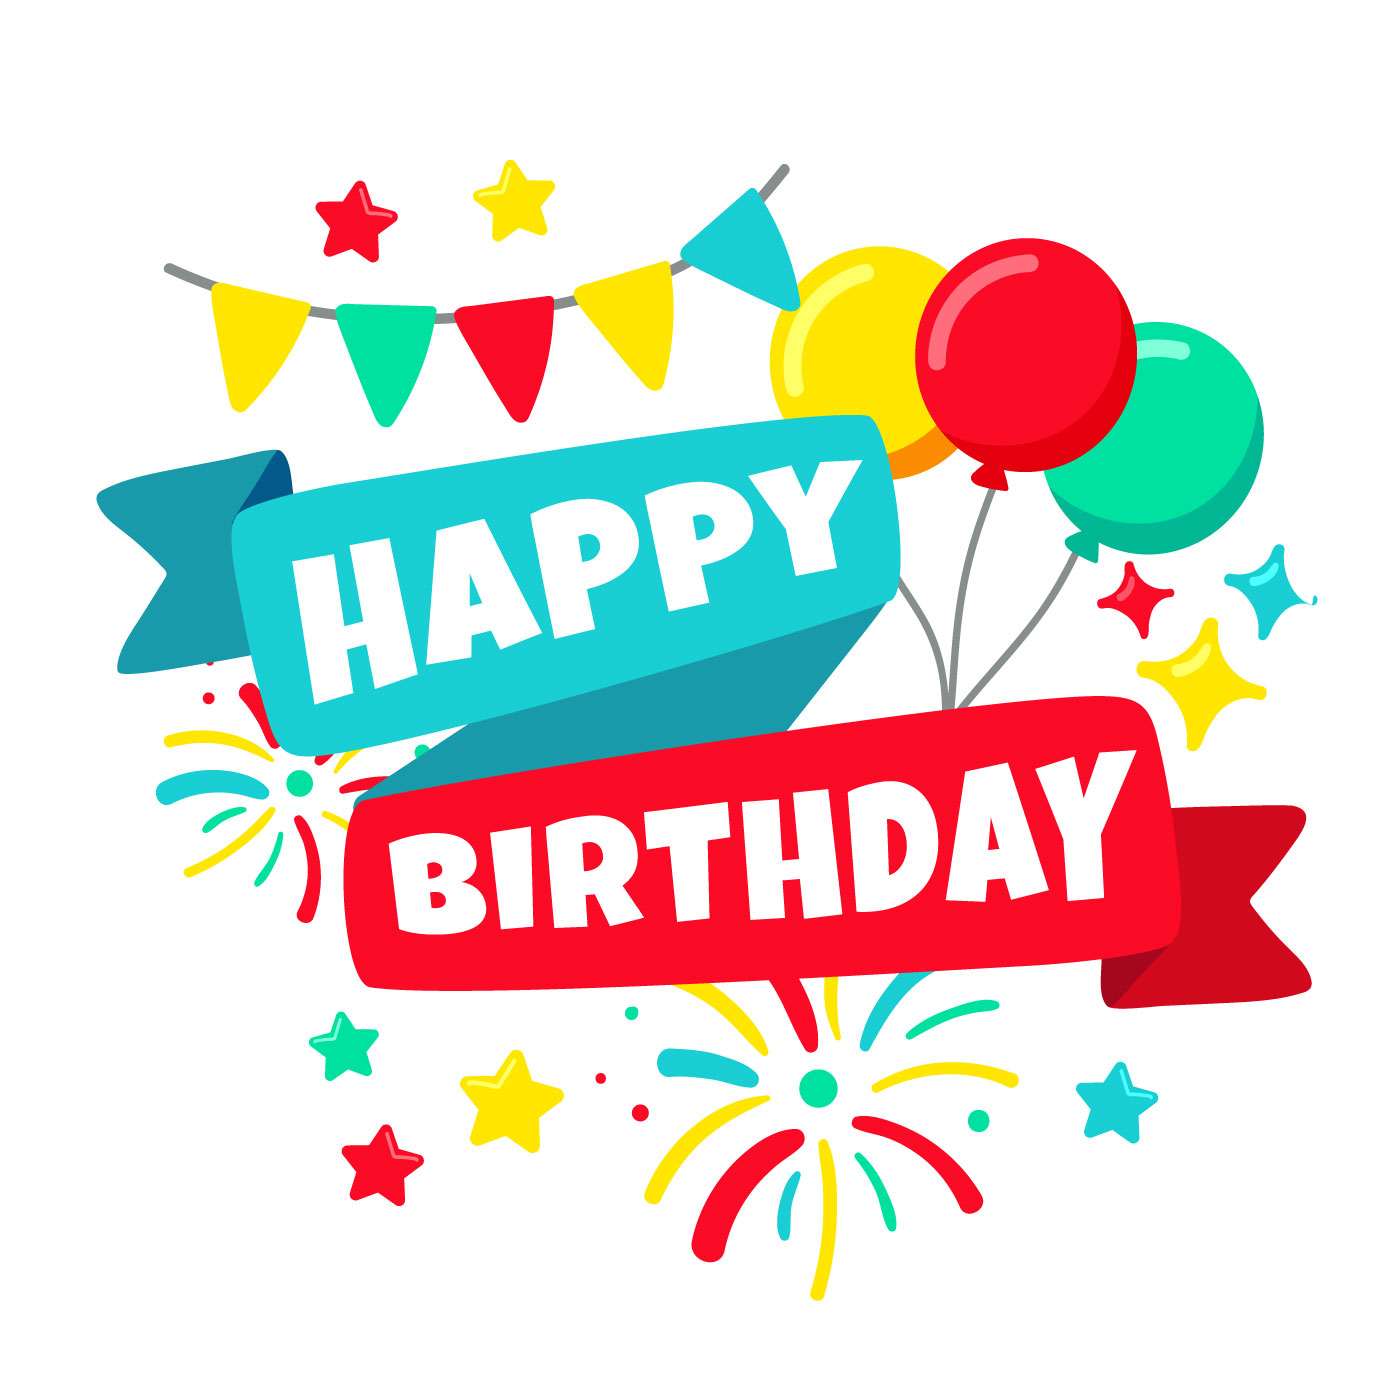 Download Happy Birthday Greeting Card - Download Free Vectors ...